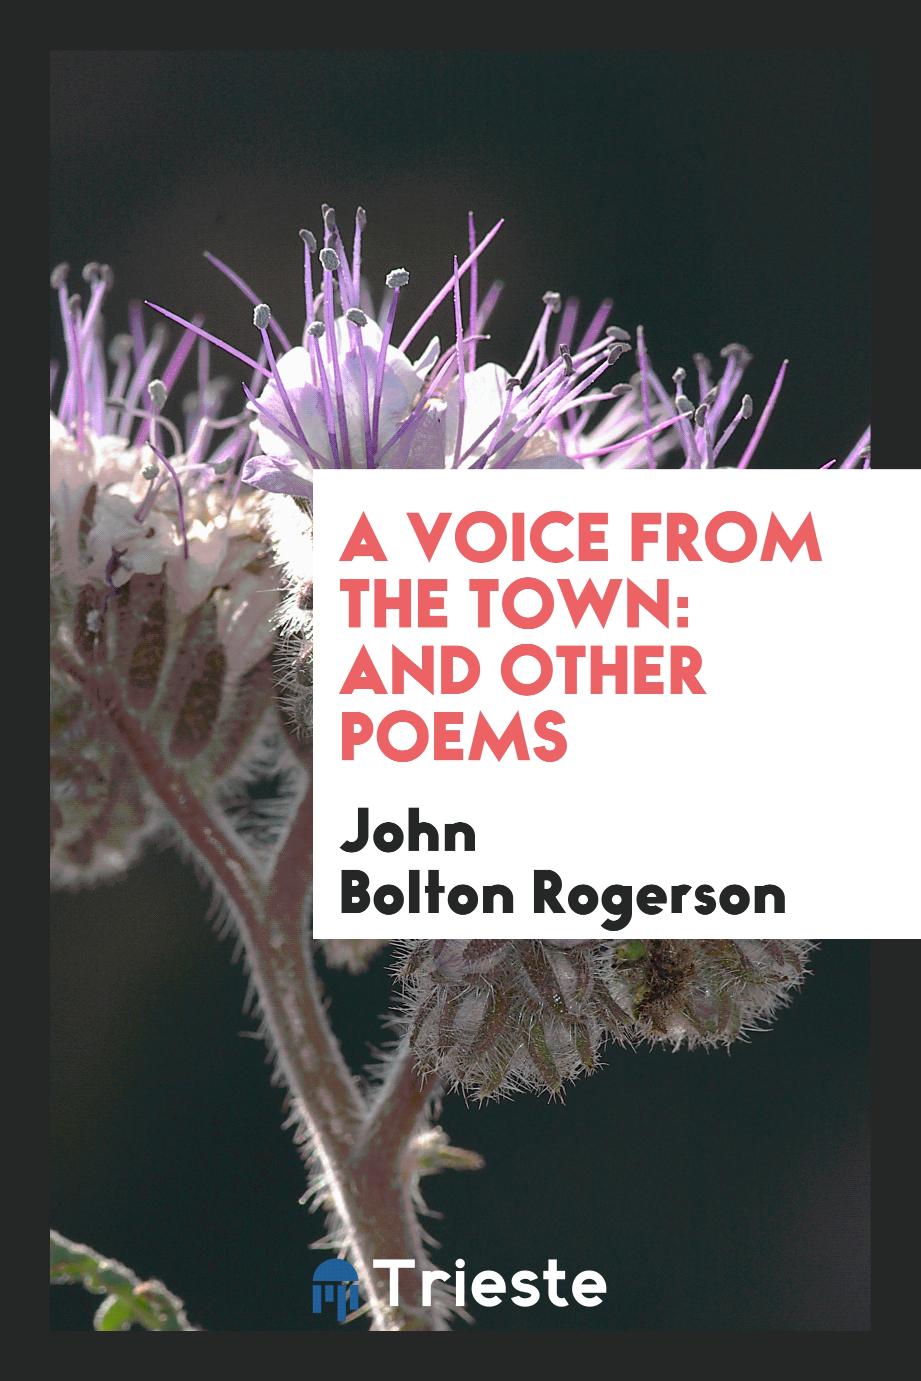 A voice from the town: and other poems